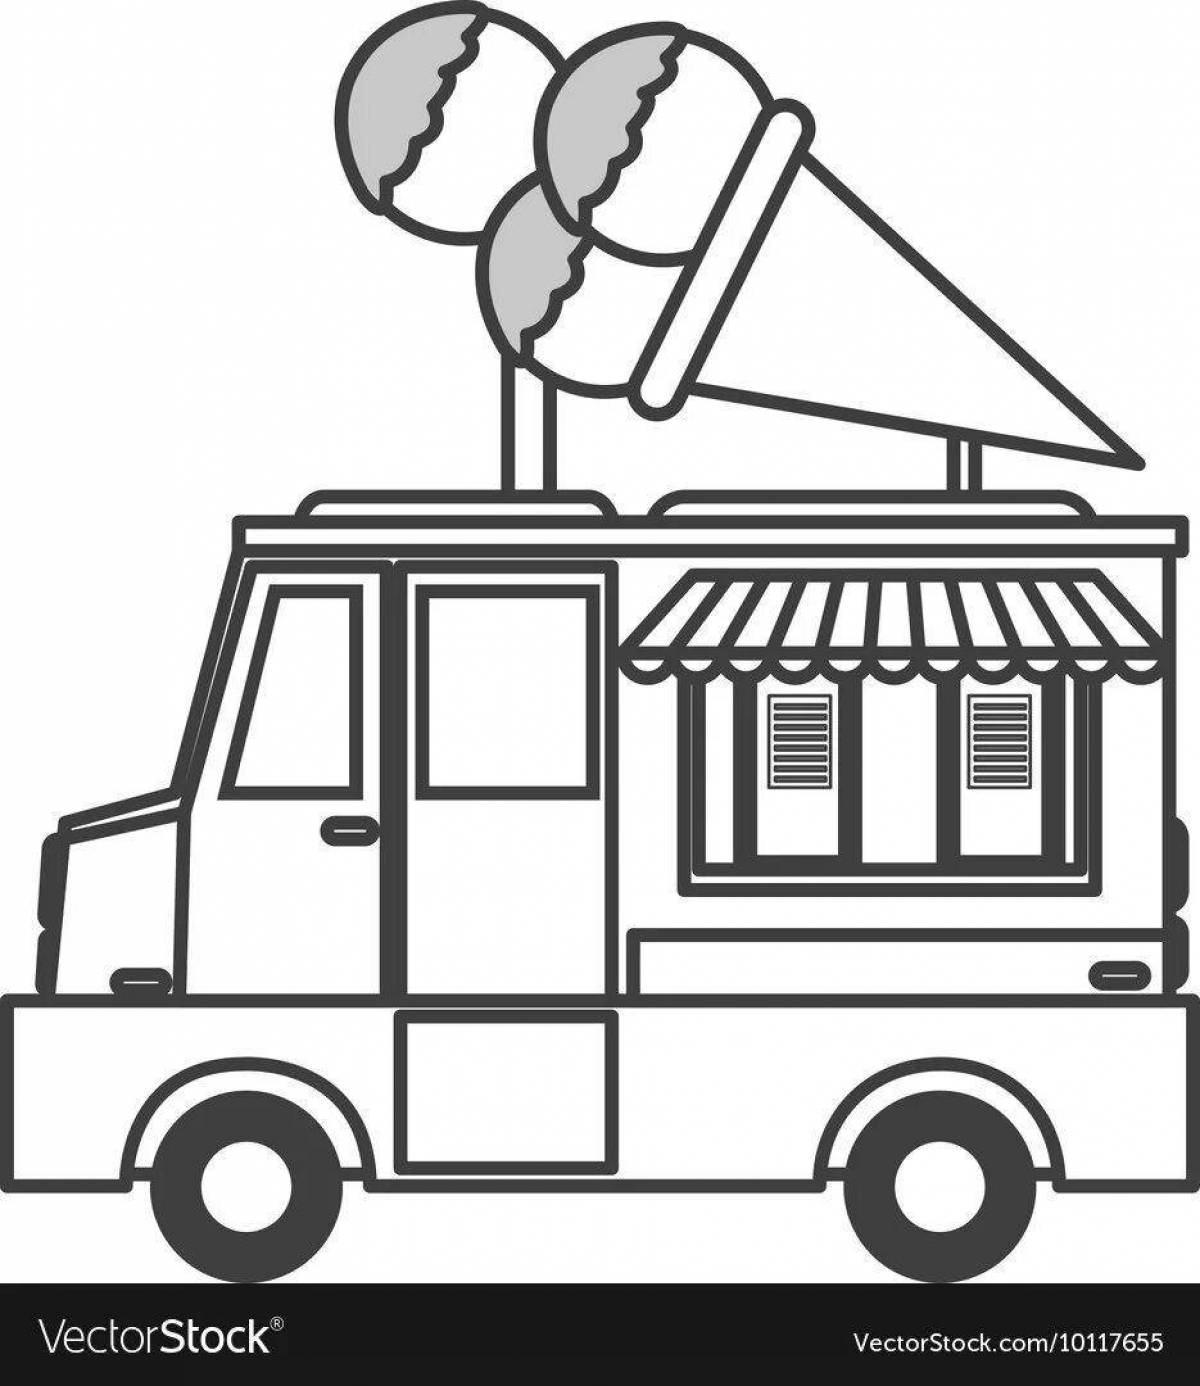 Coloring page for bright ice cream truck